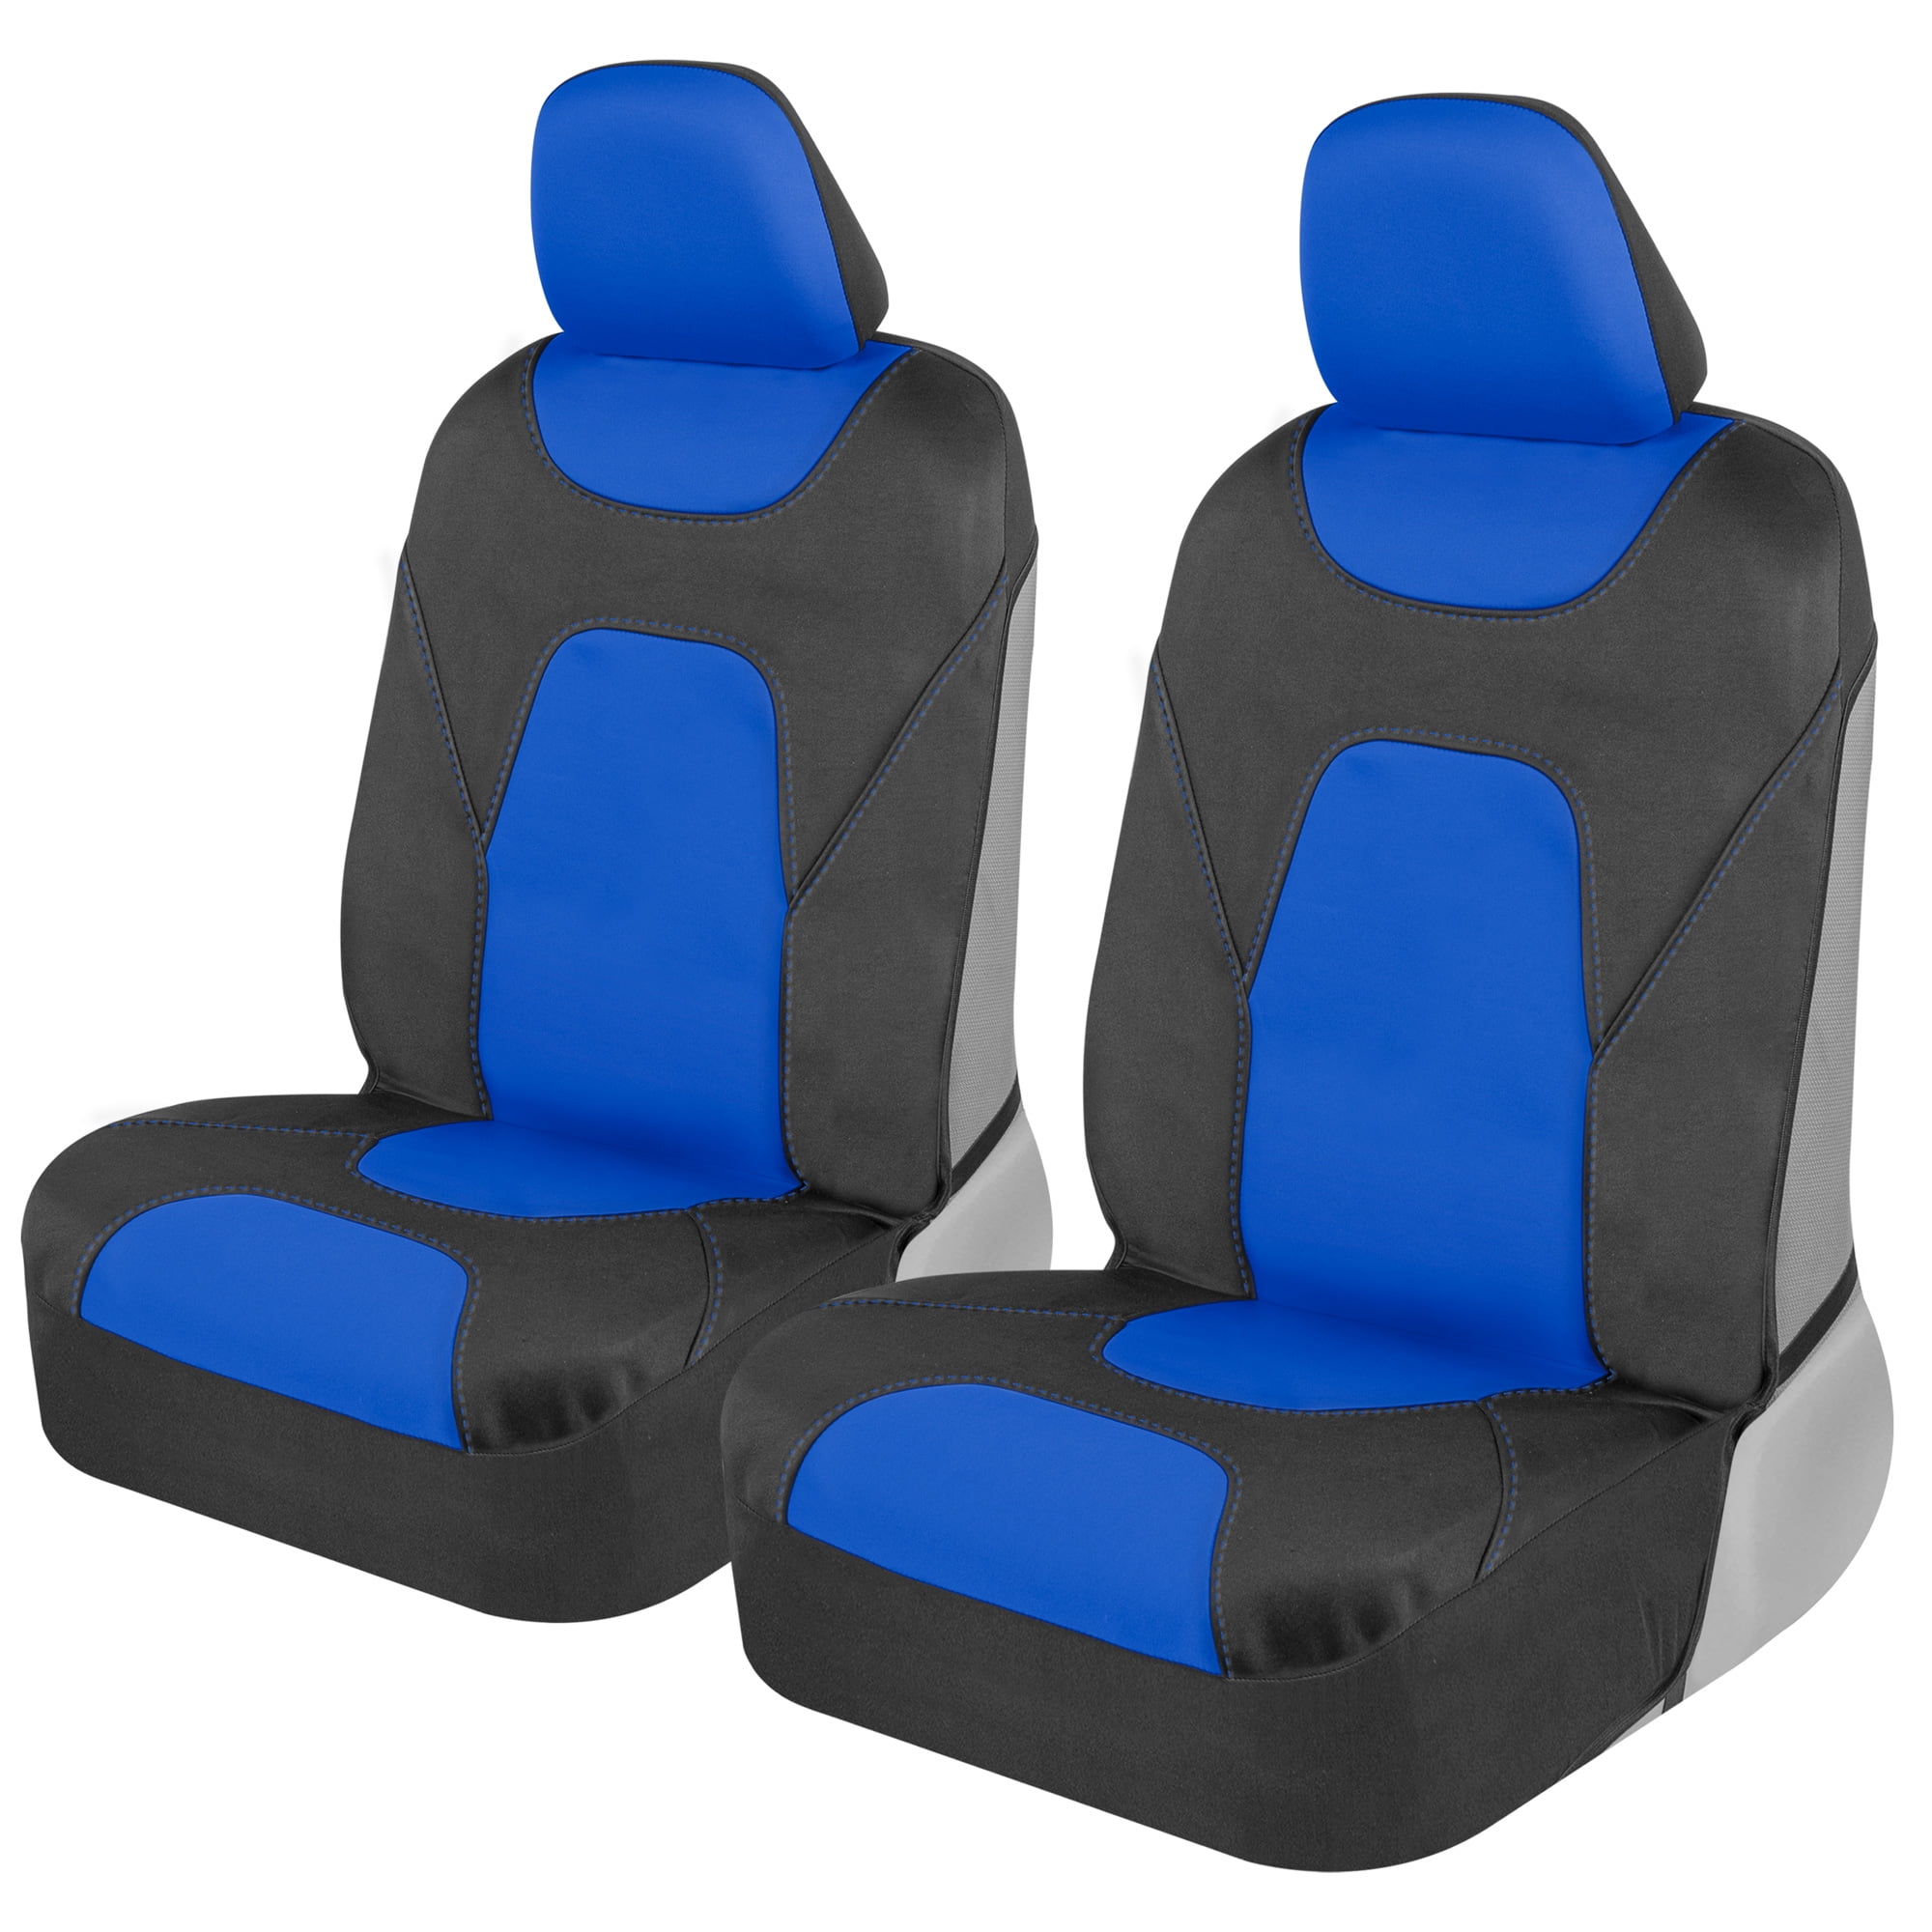 Motor Trend Blue Faux Leather Car Seat Cushion Full Set Includes Front & Back Car Seat Protector Padded Seat Covers for Cars with Storage Pockets